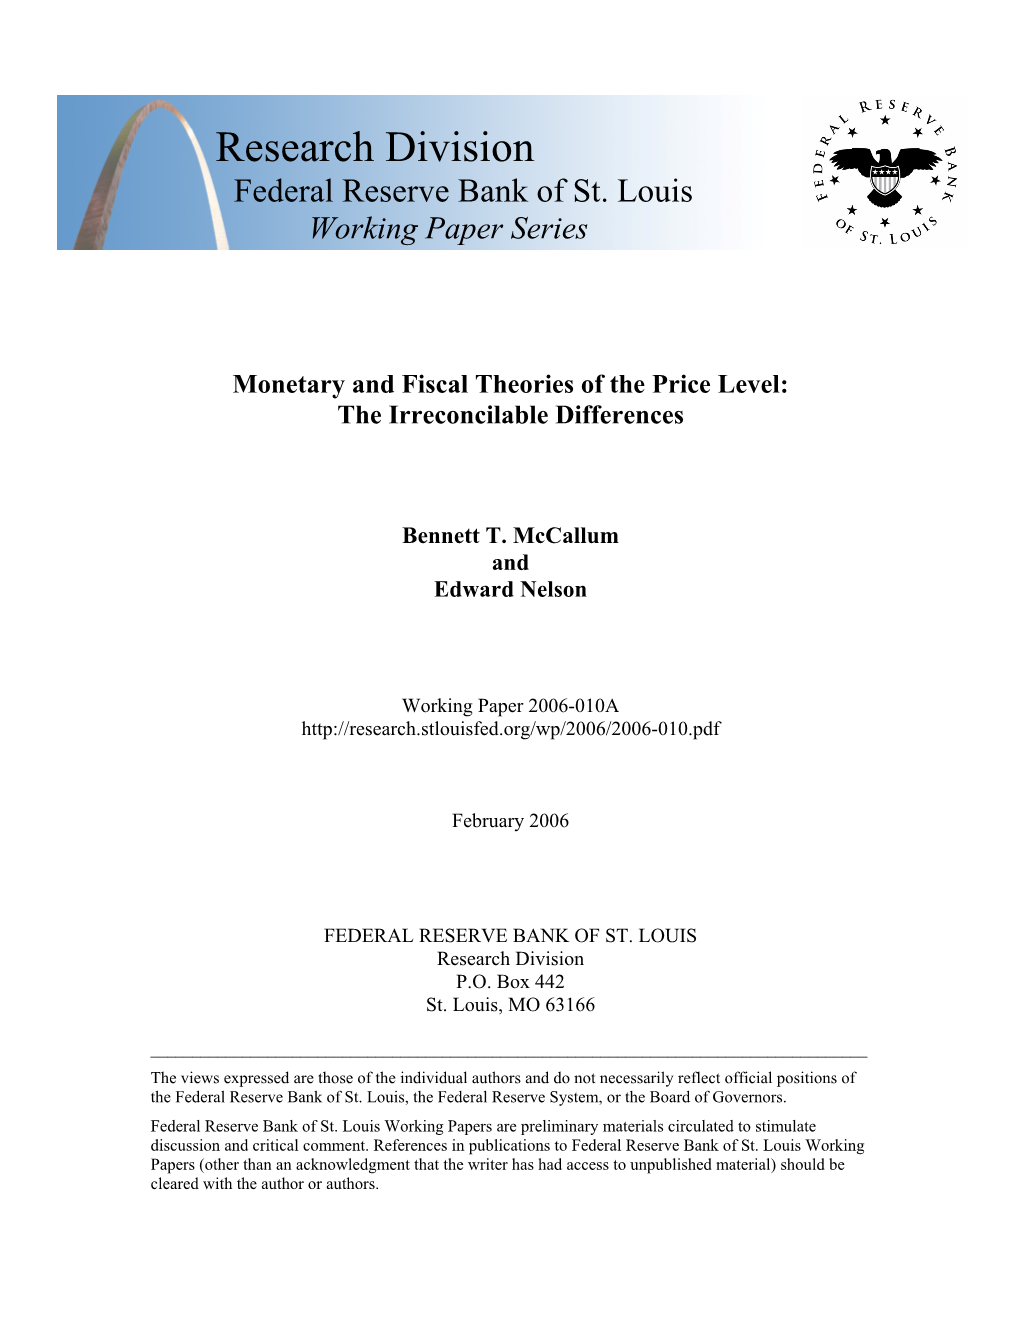 Monetary and Fiscal Theories of the Price Level: the Irreconcilable Differences